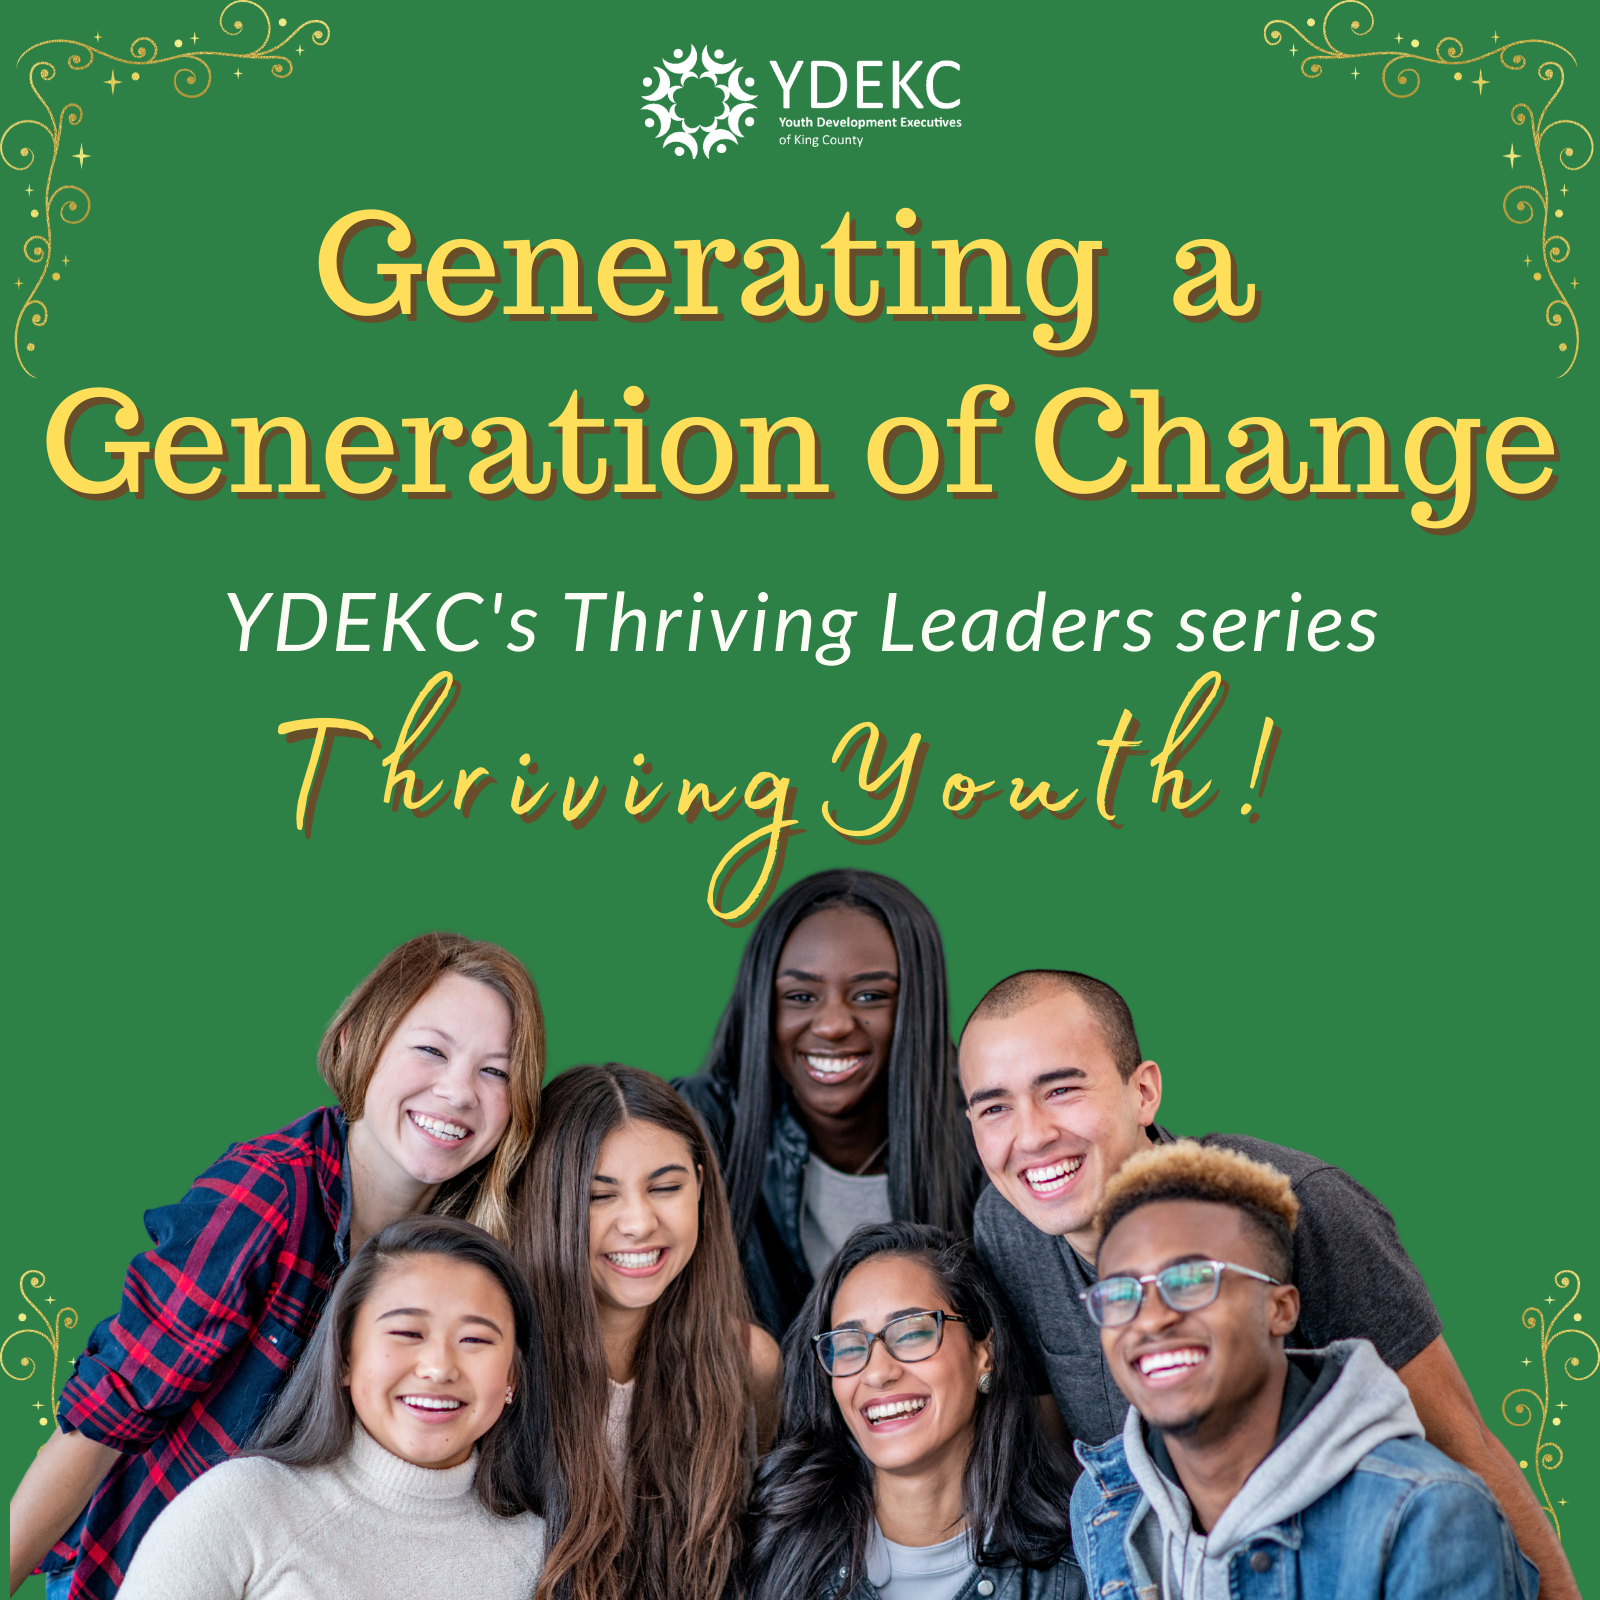 Thriving Youth - Generating a Generation of Change (December 7 & 14, 2021)